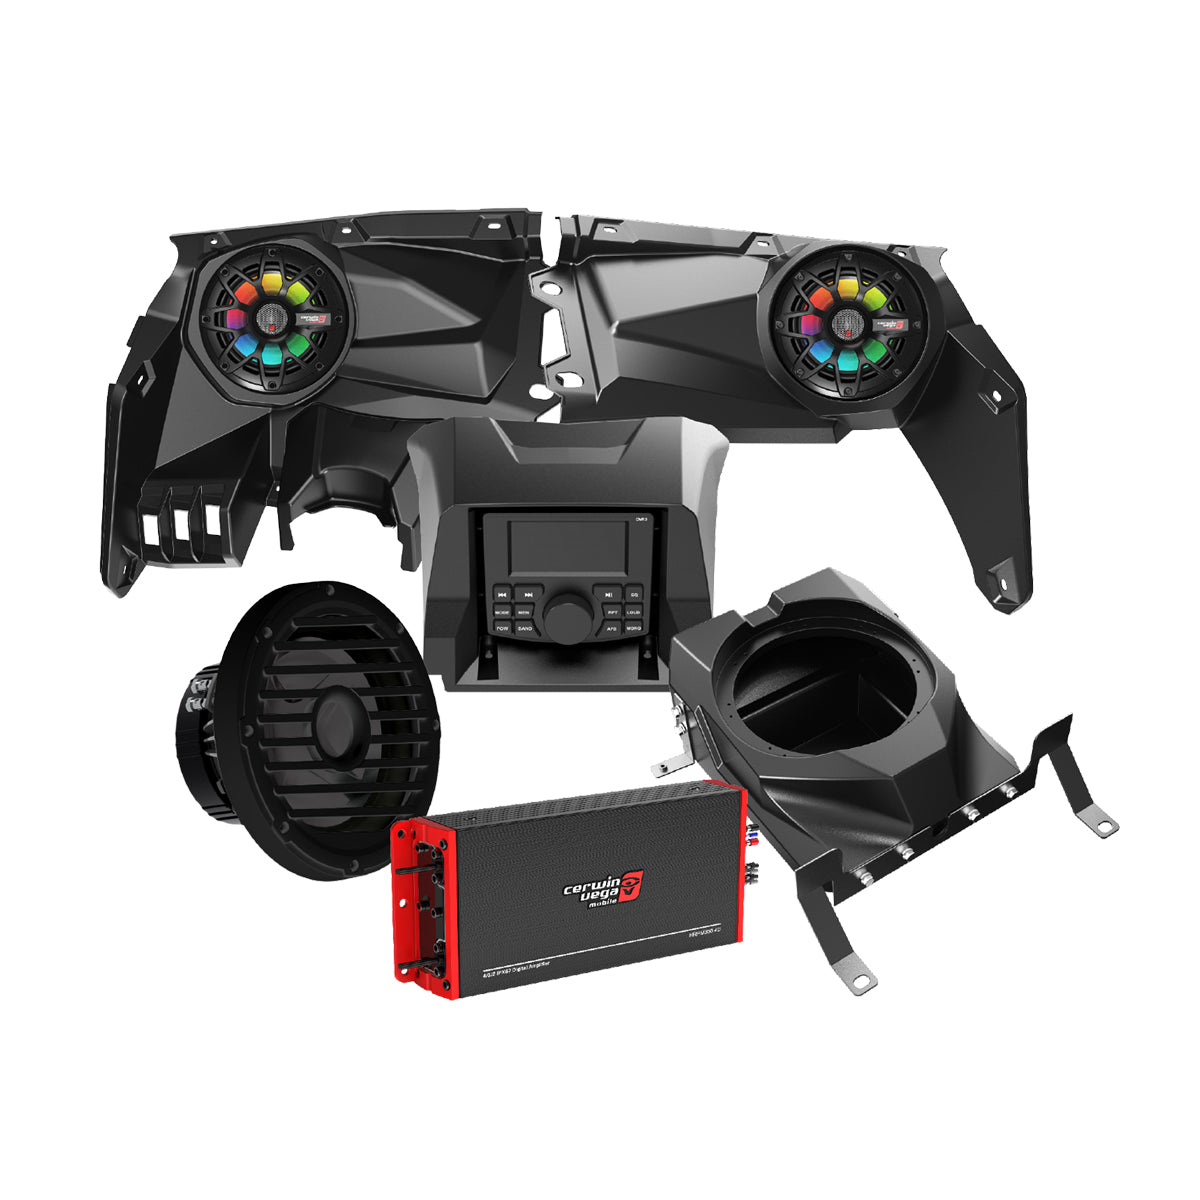 2017+ Can Am Maverick X3/X3 Max Complete Speaker Kit with 6 Channel Amplifier and 10” Sealed Marine Subwoofer